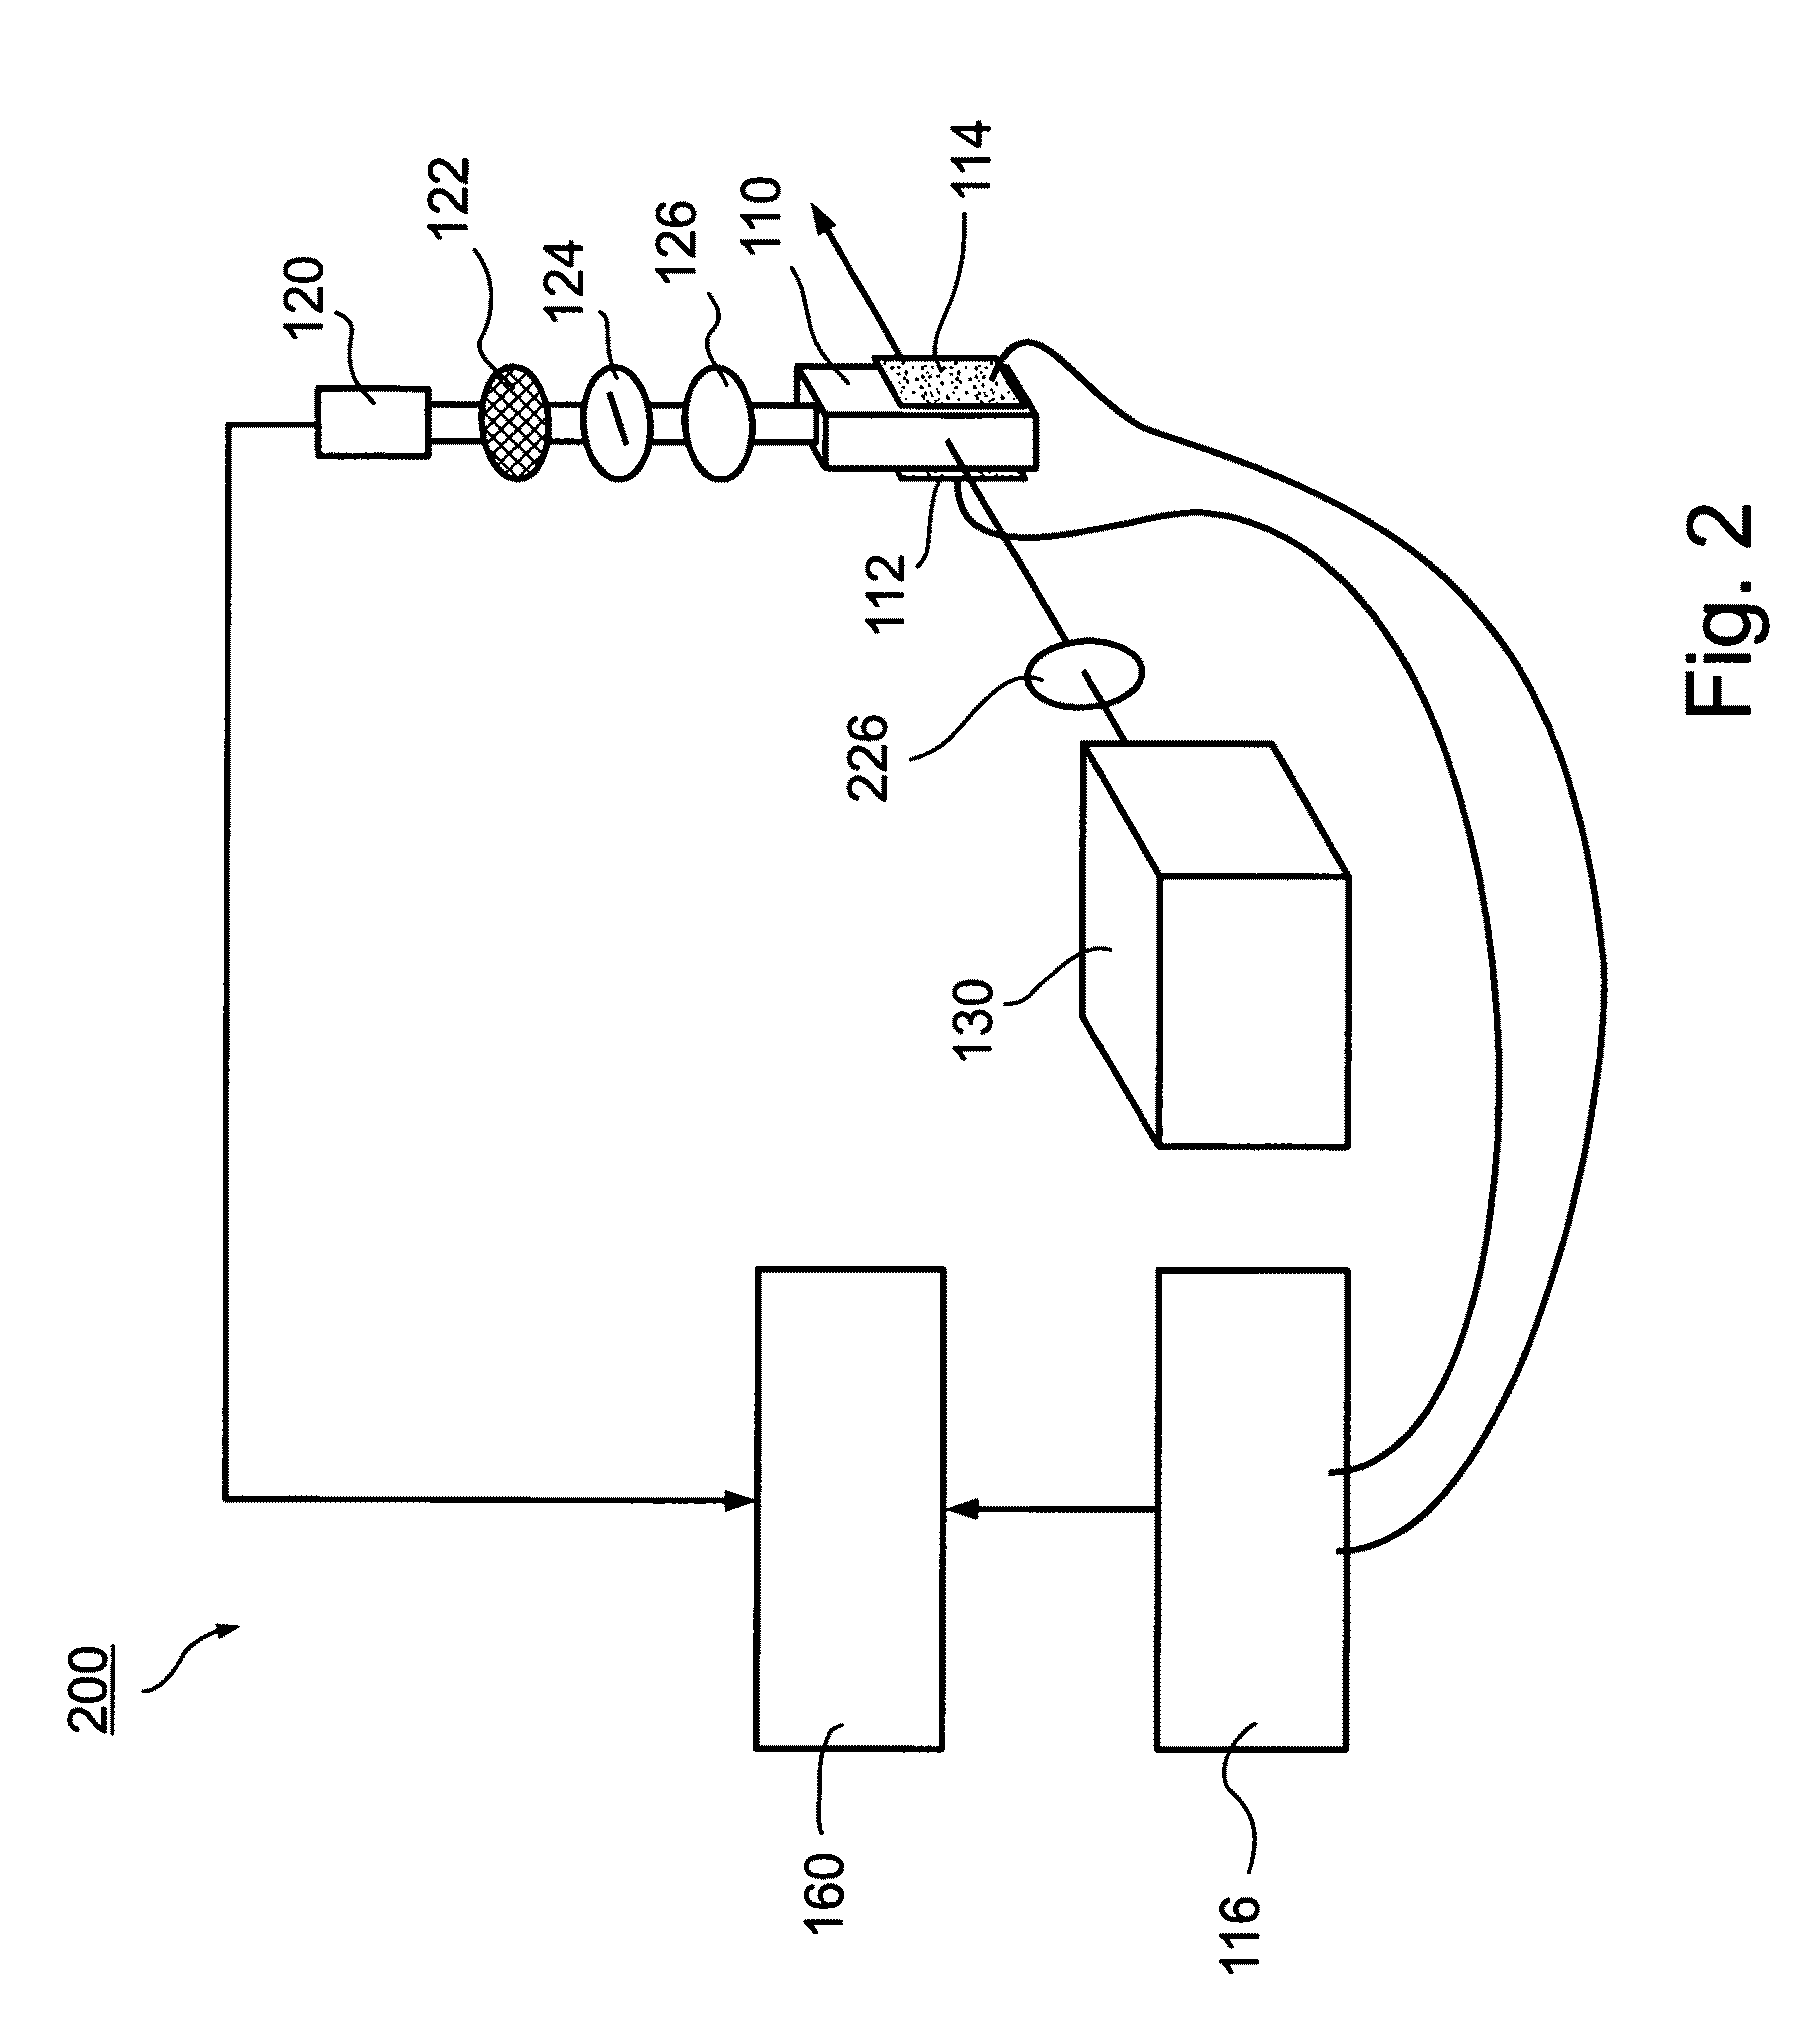 Method and system for detecting a target within a polupation of molecules